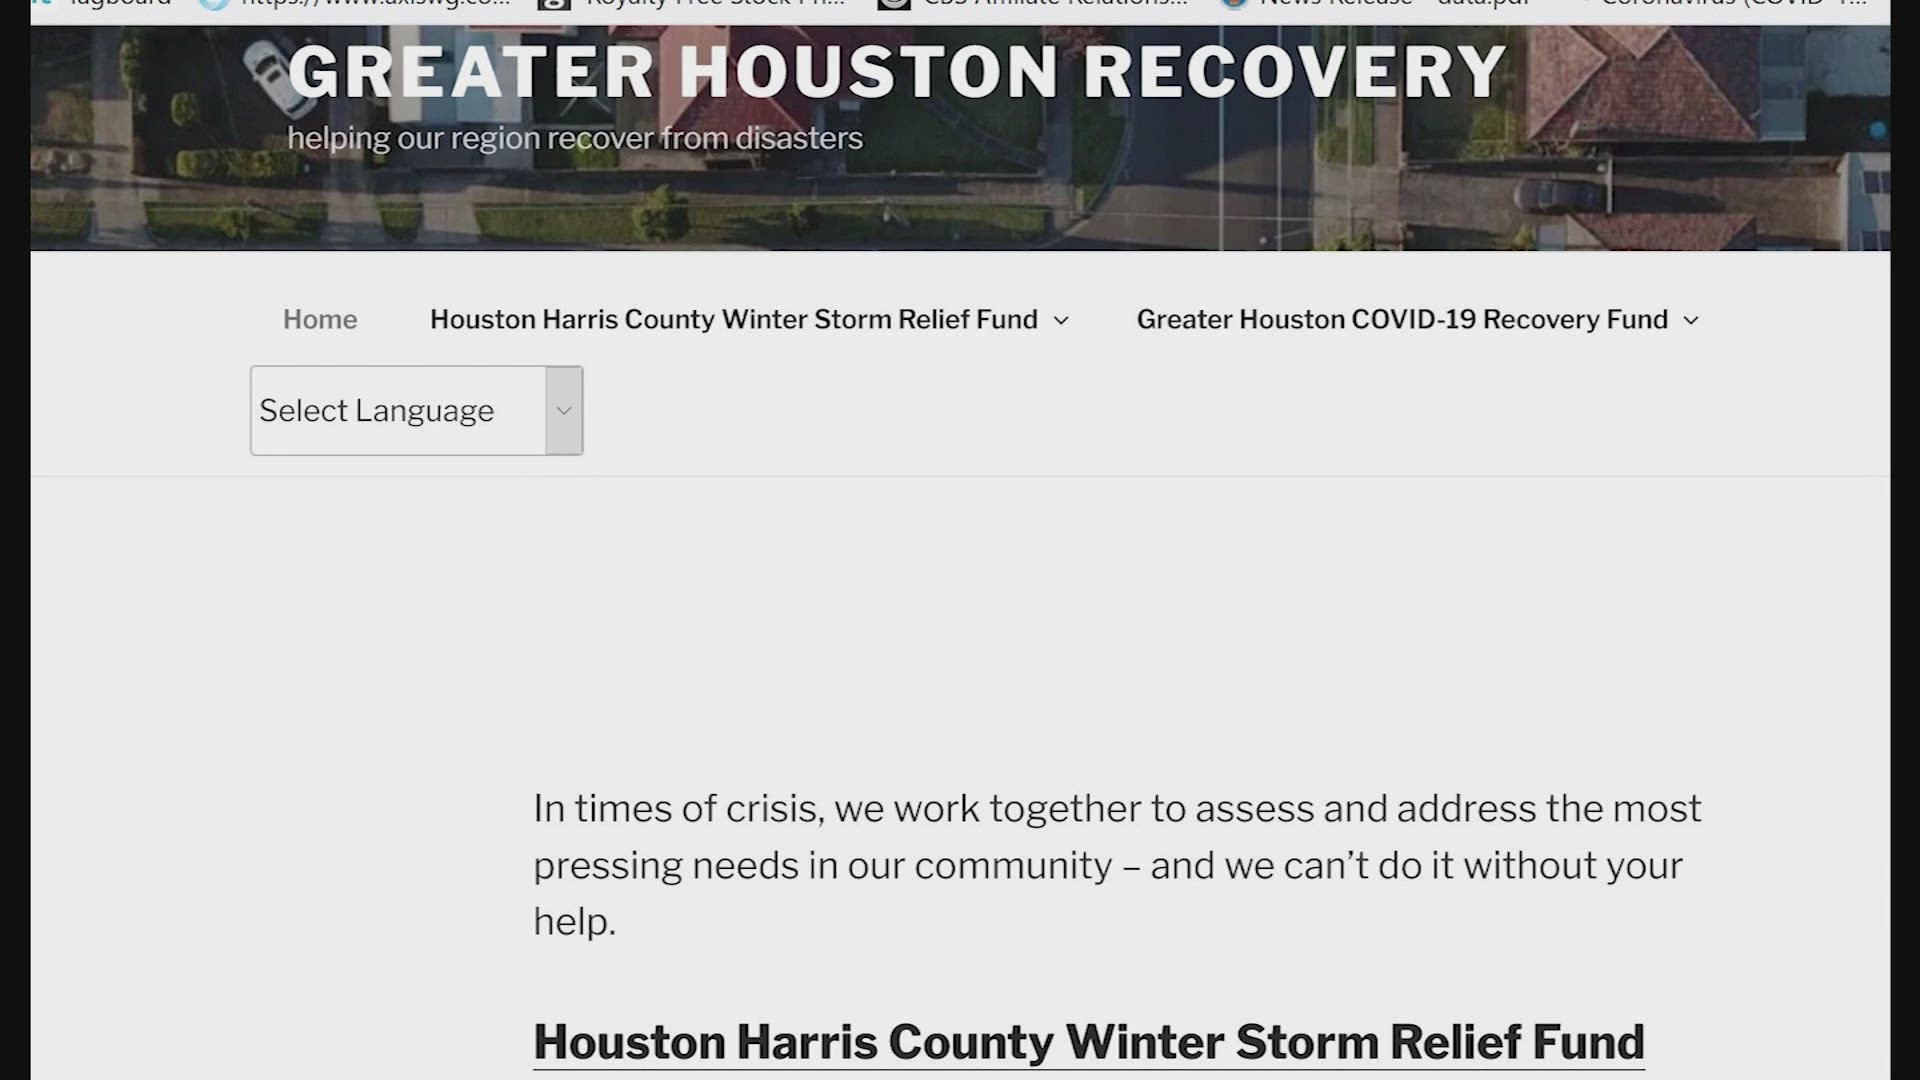 Houston and Harris County have established a relief fund for residents needing help repairing their homes after the winter storm. Donations are needed.